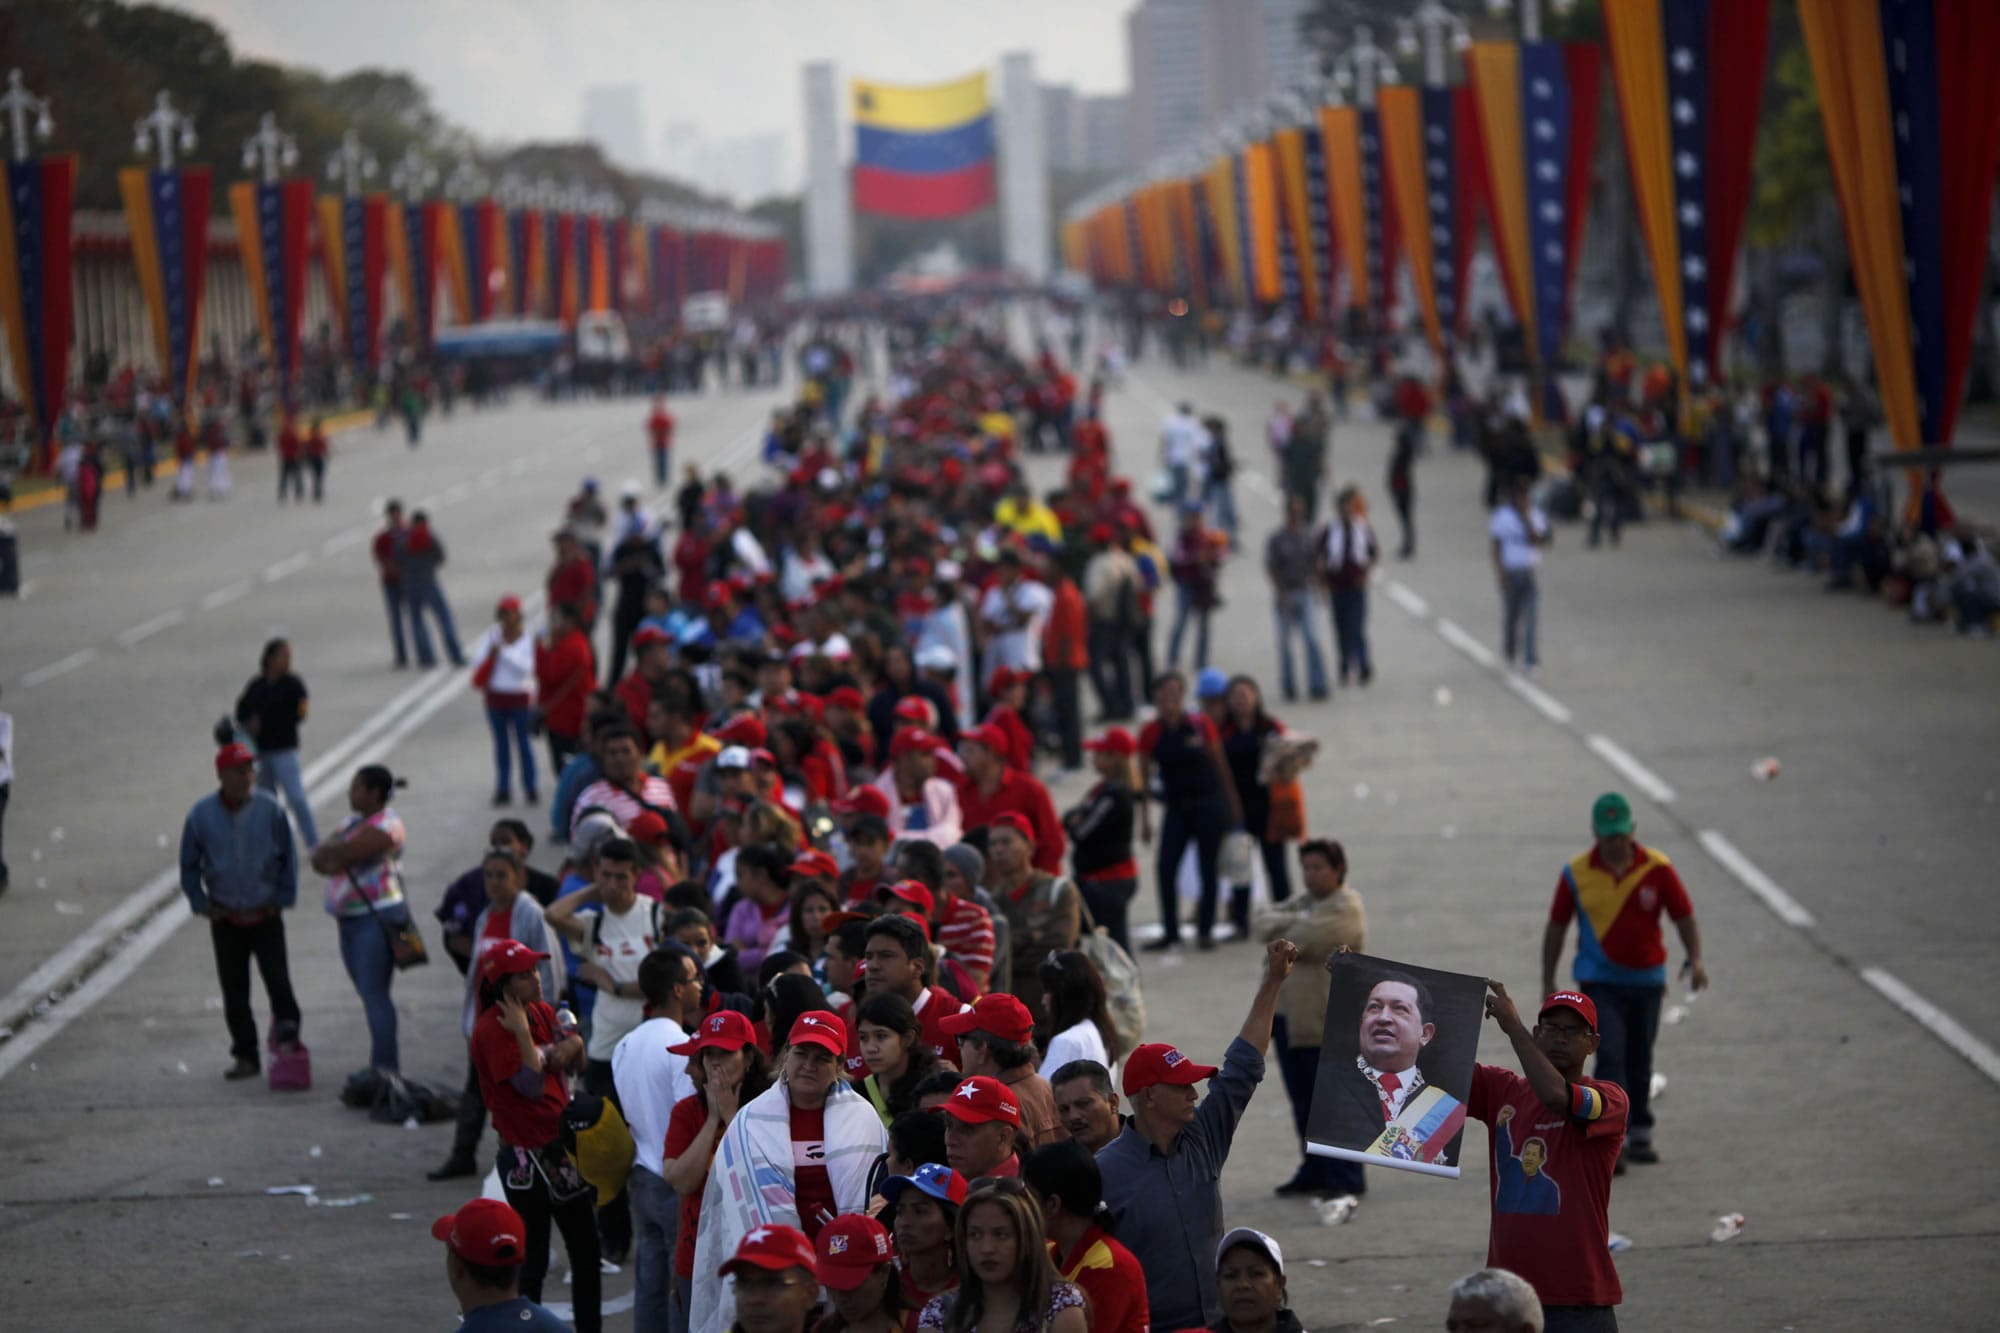 People line up Saturday to see the body of Venezuela's late President Hugo Chavez outside the military academy where he is lying in state in Caracas, Venezuela. Chavez died Tuesday after a nearly two-year bout with cancer.